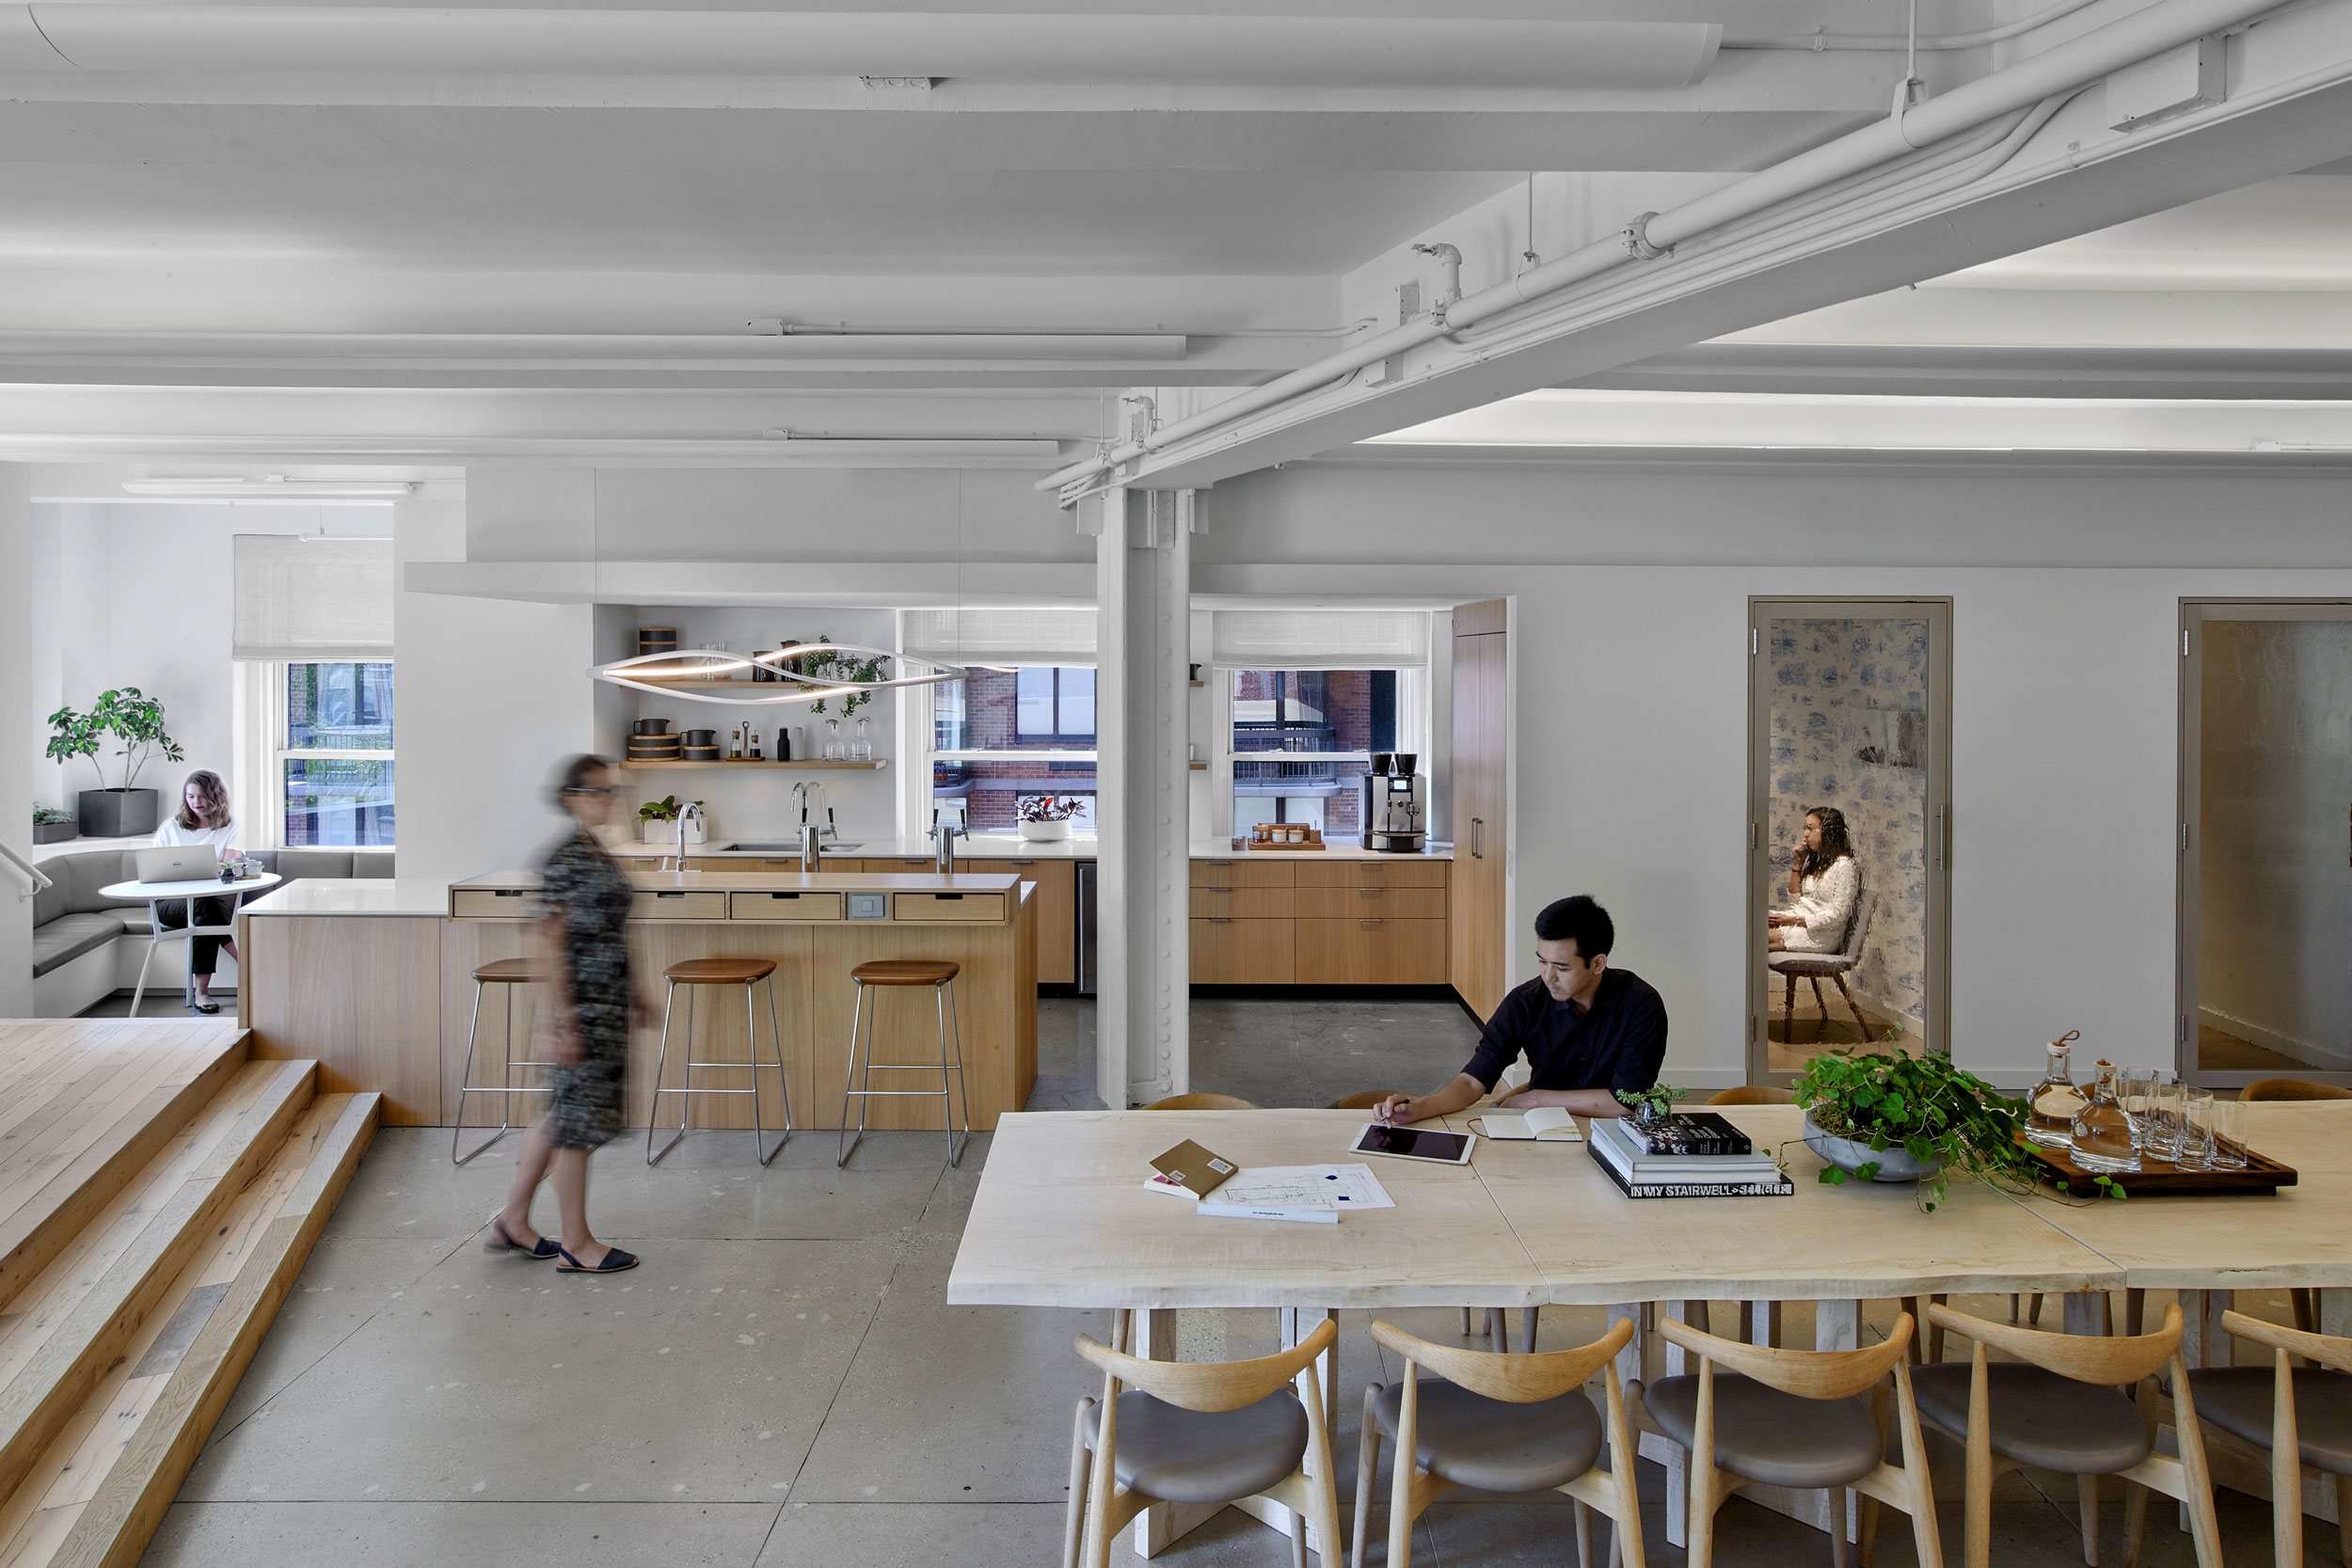 COOKFOX Architects' own office by COOKFOX Architects with Sustainability Consultants Paladino and Terrapin Bright Green. Photo: Eric Laignel.